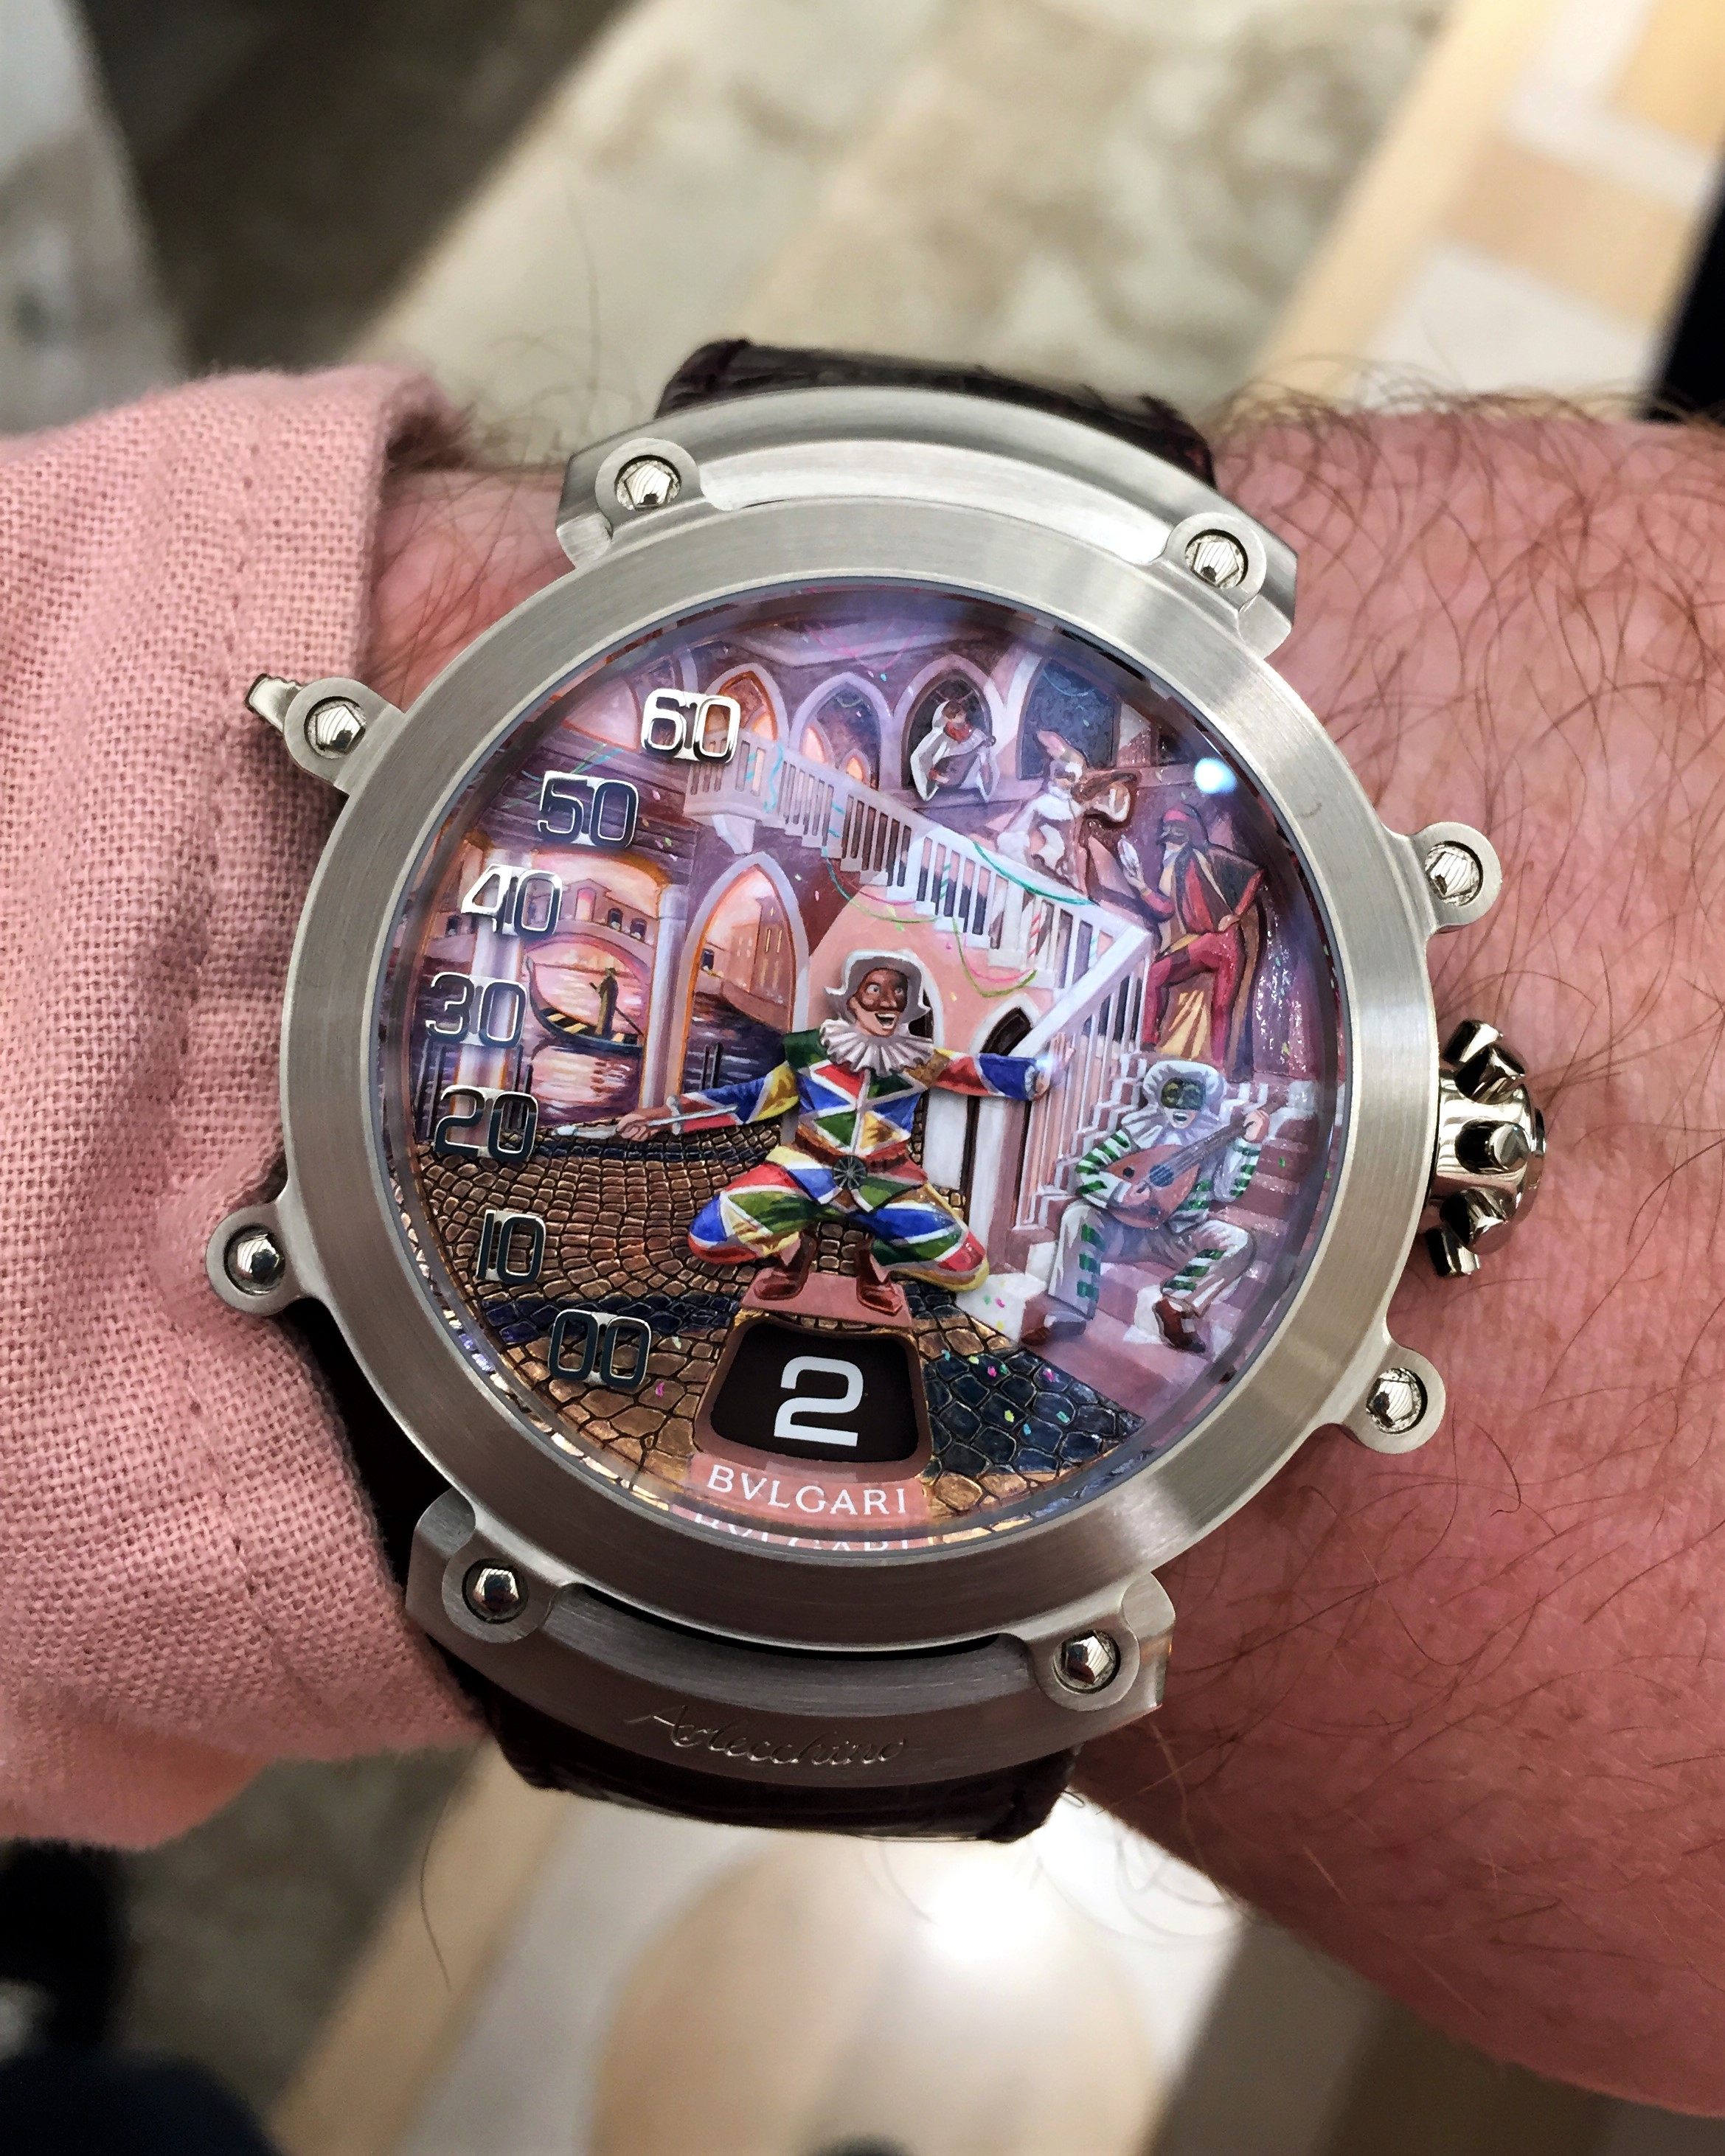 Bulgari Commedia Dell'Arte minute repeater with jumping hour and retrograde minutes